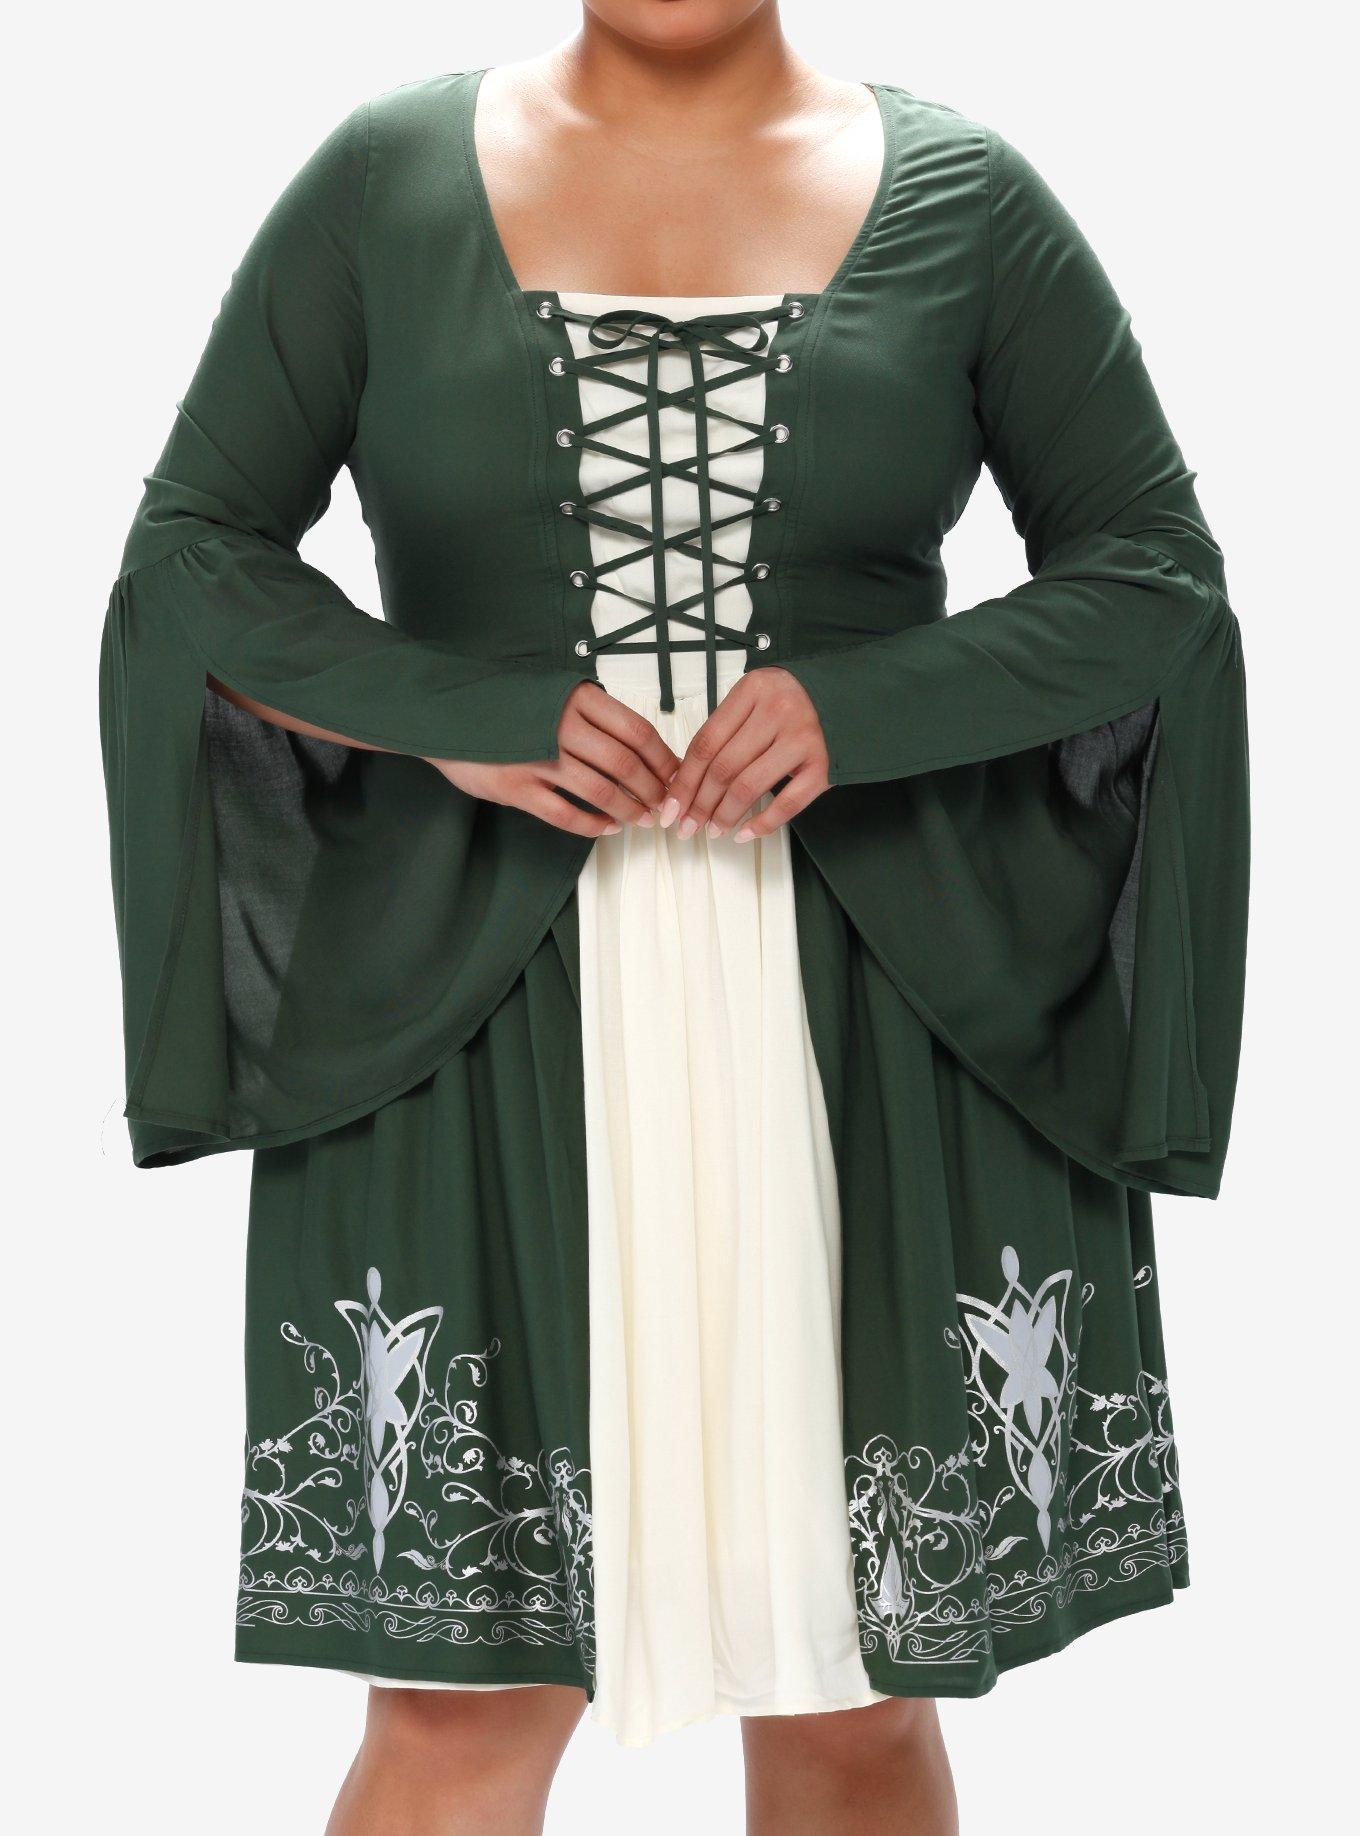 The Lord Of The Rings Elven Dress Plus Size, MULTI, hi-res